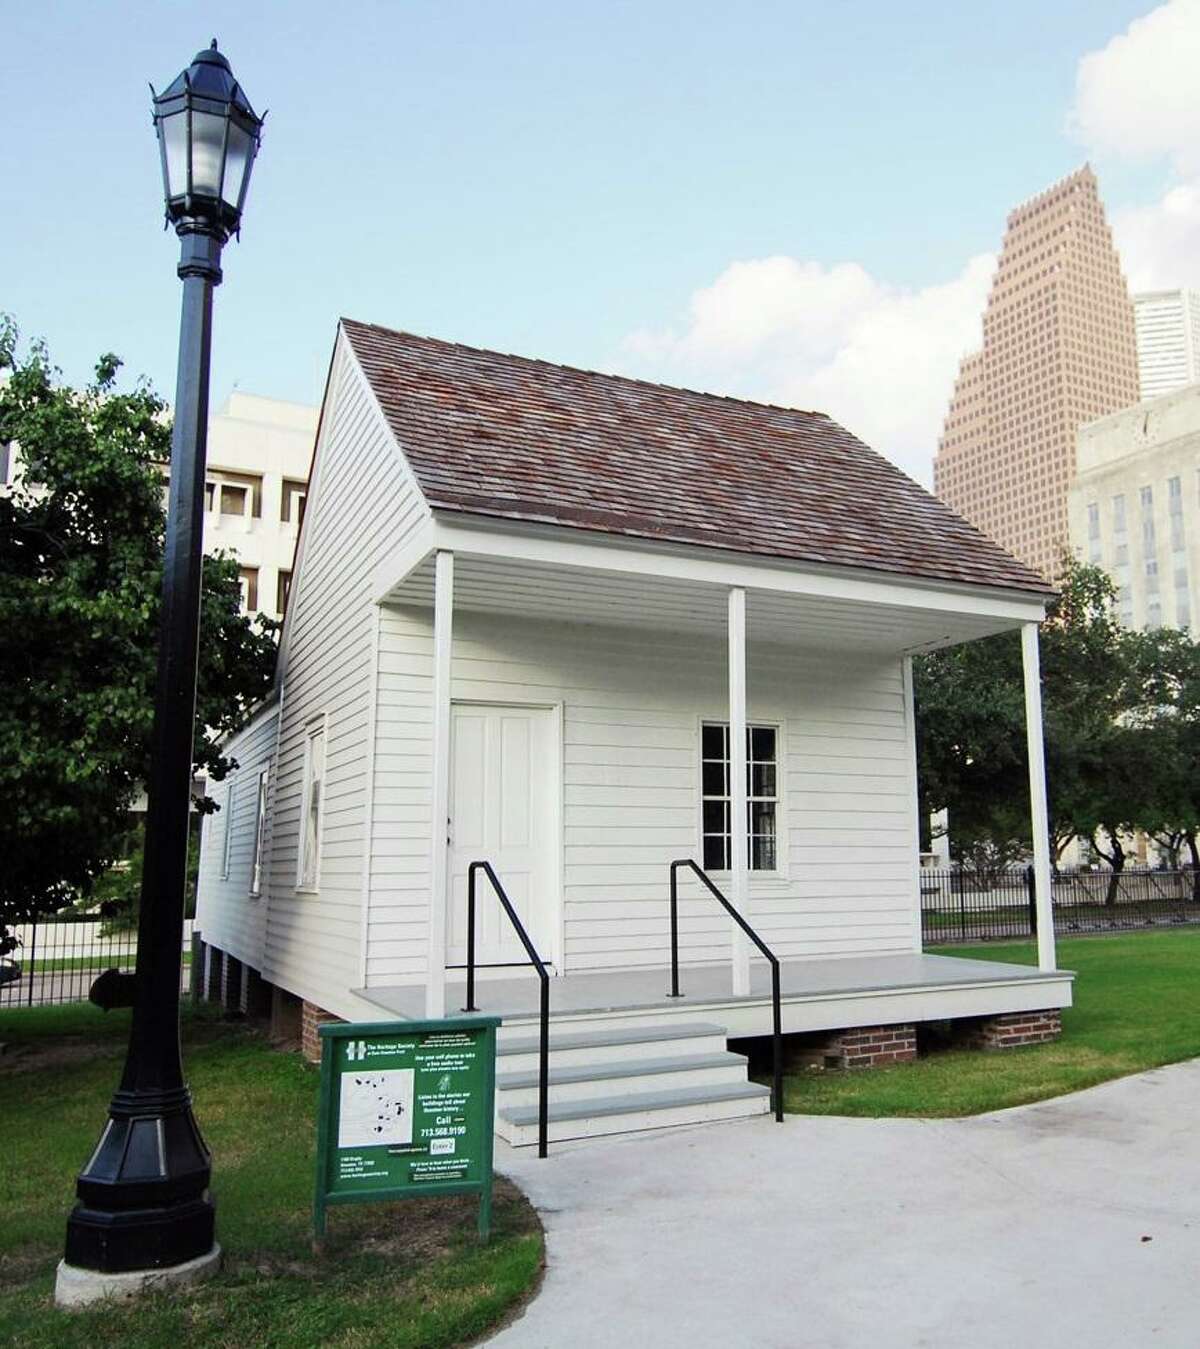 The Fourth Ward Cottage at Sam Houston Park, maintained by the Heritage Society, has been added to the Slave Route Project.